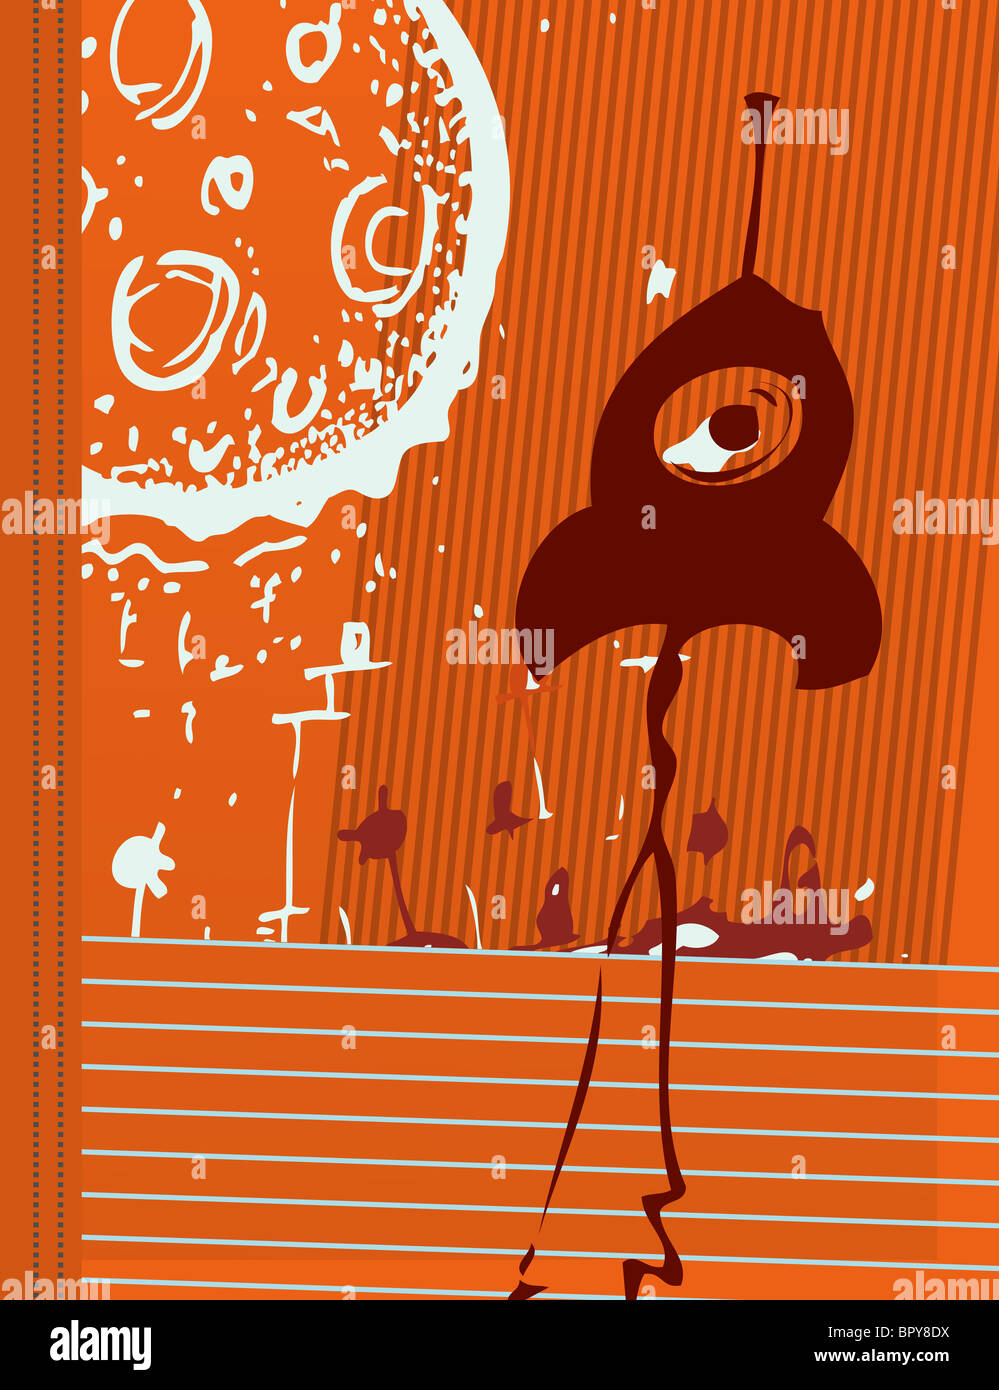 Doodles of a rocket blasting off to the moon on a notebook cover Stock Photo